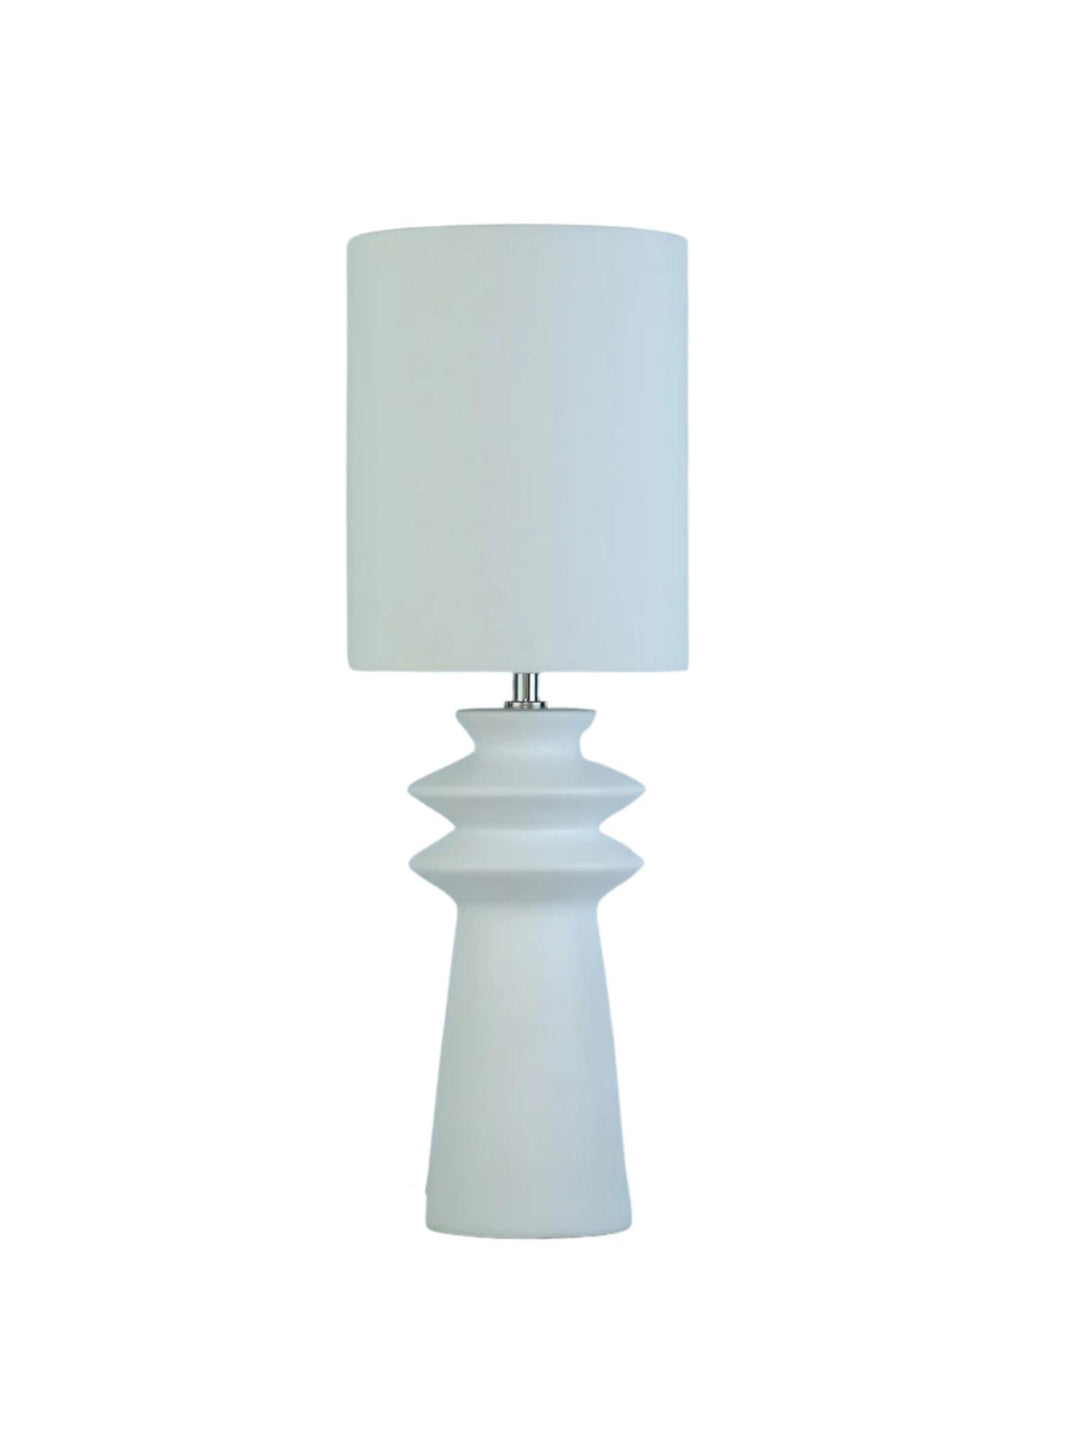 Zoey Table Lamp | Table Lamp | Derrick Details